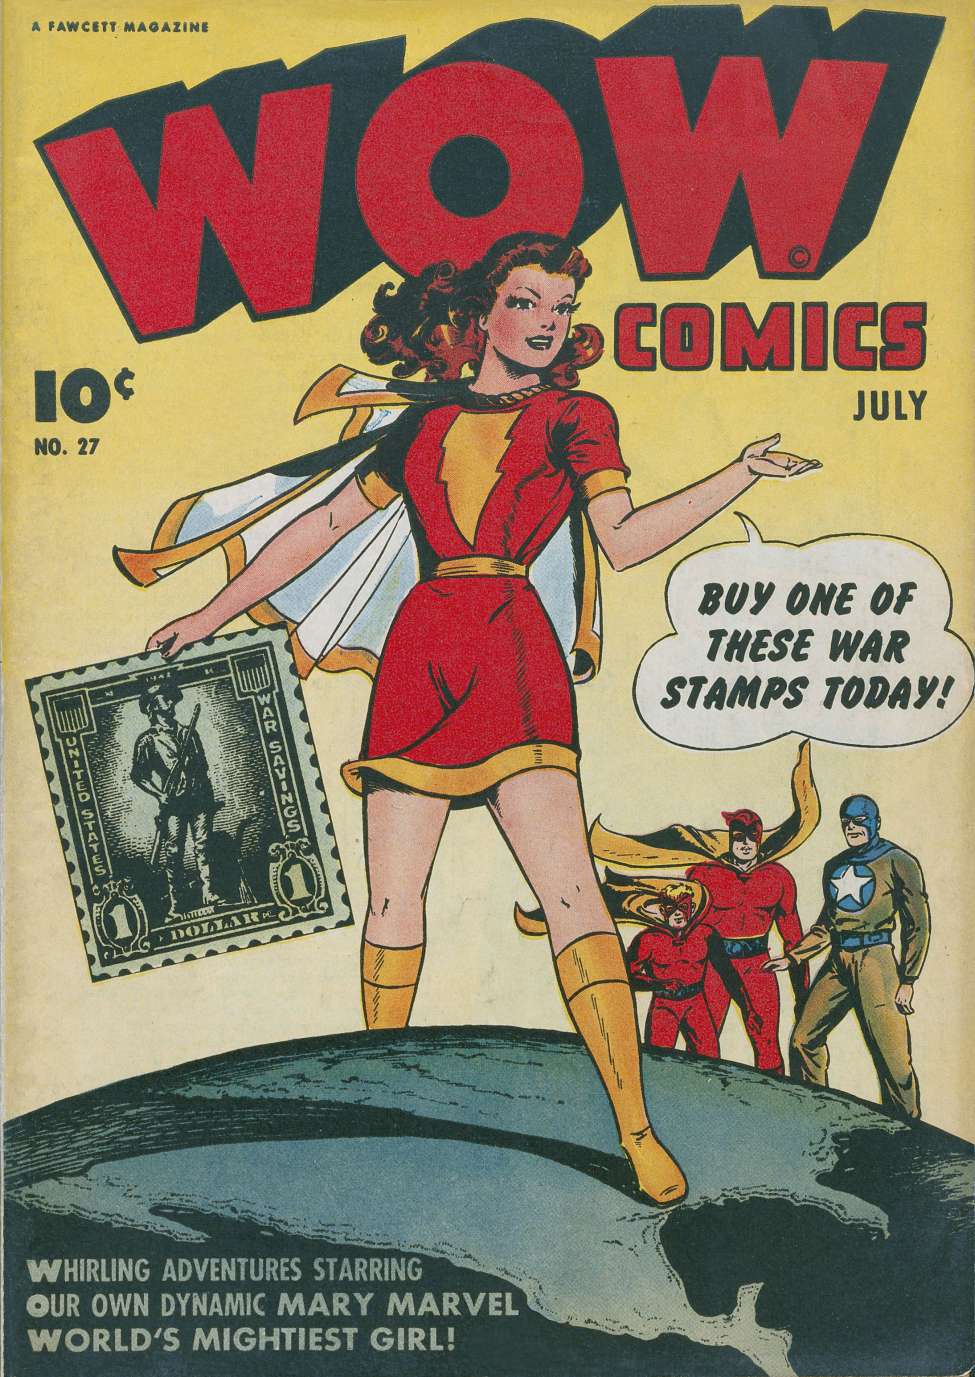 Book Cover For Wow Comics 27 - Version 2